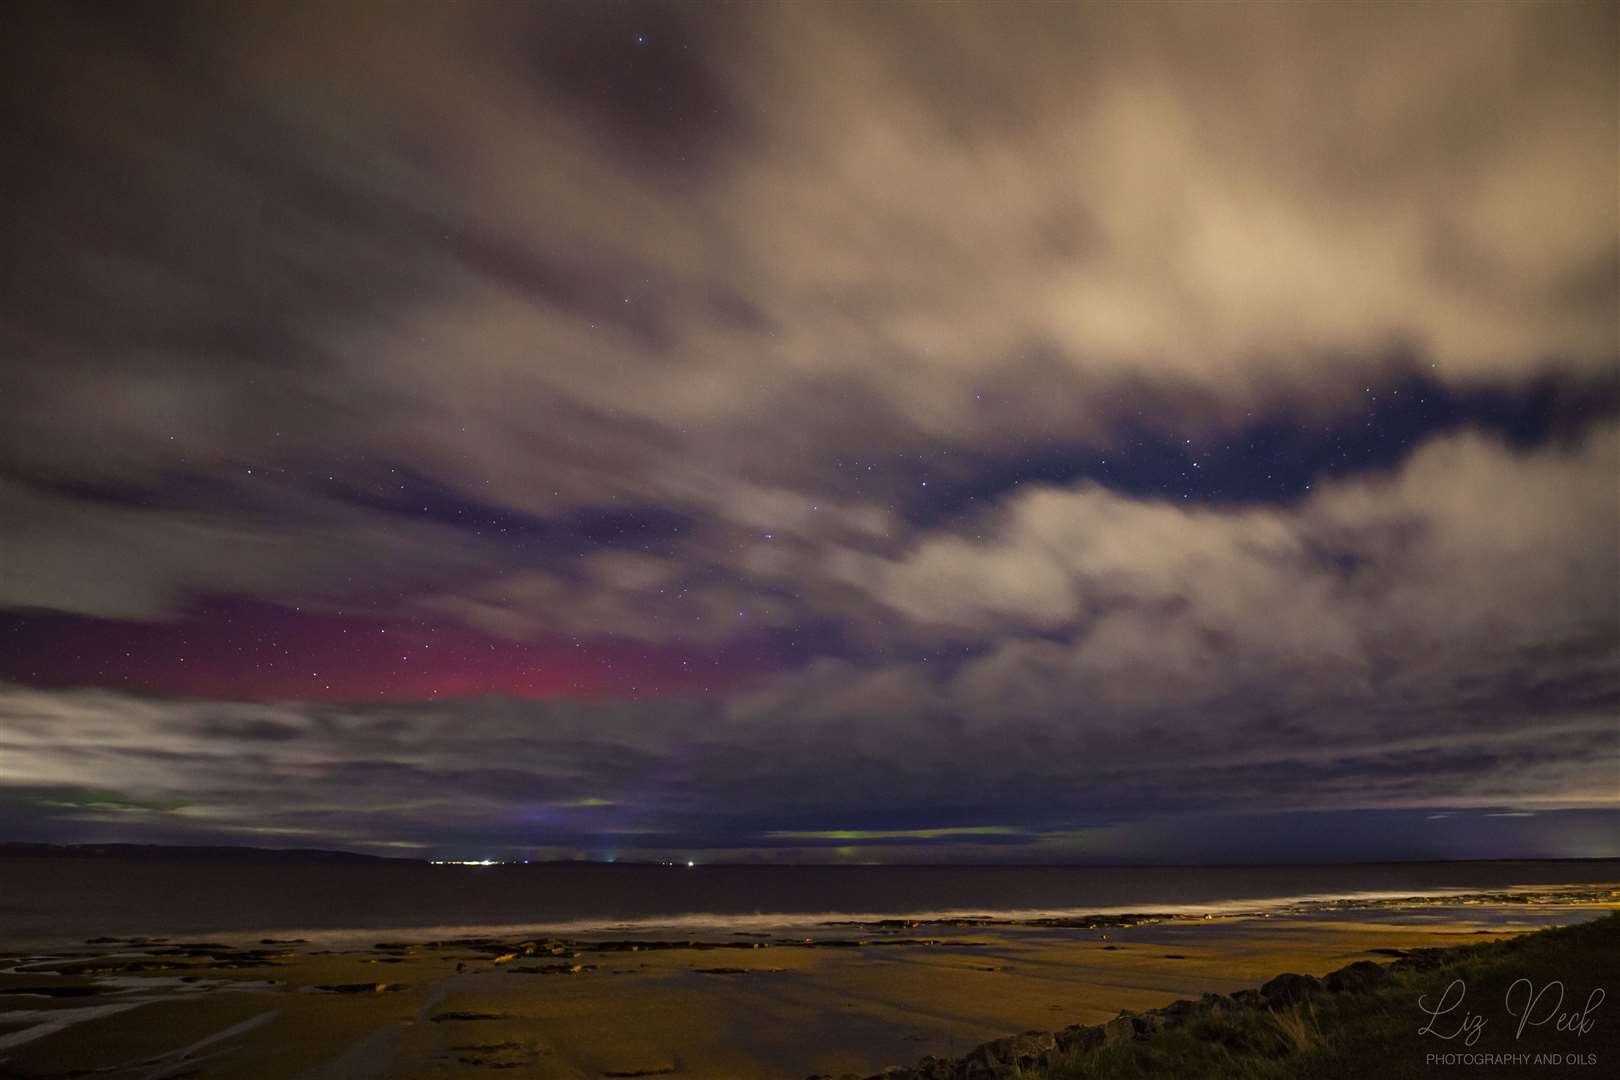 A rare example of red glare from the Northern Lights captured on the Nairn Seafront. Picture by: Liz Peck photography.